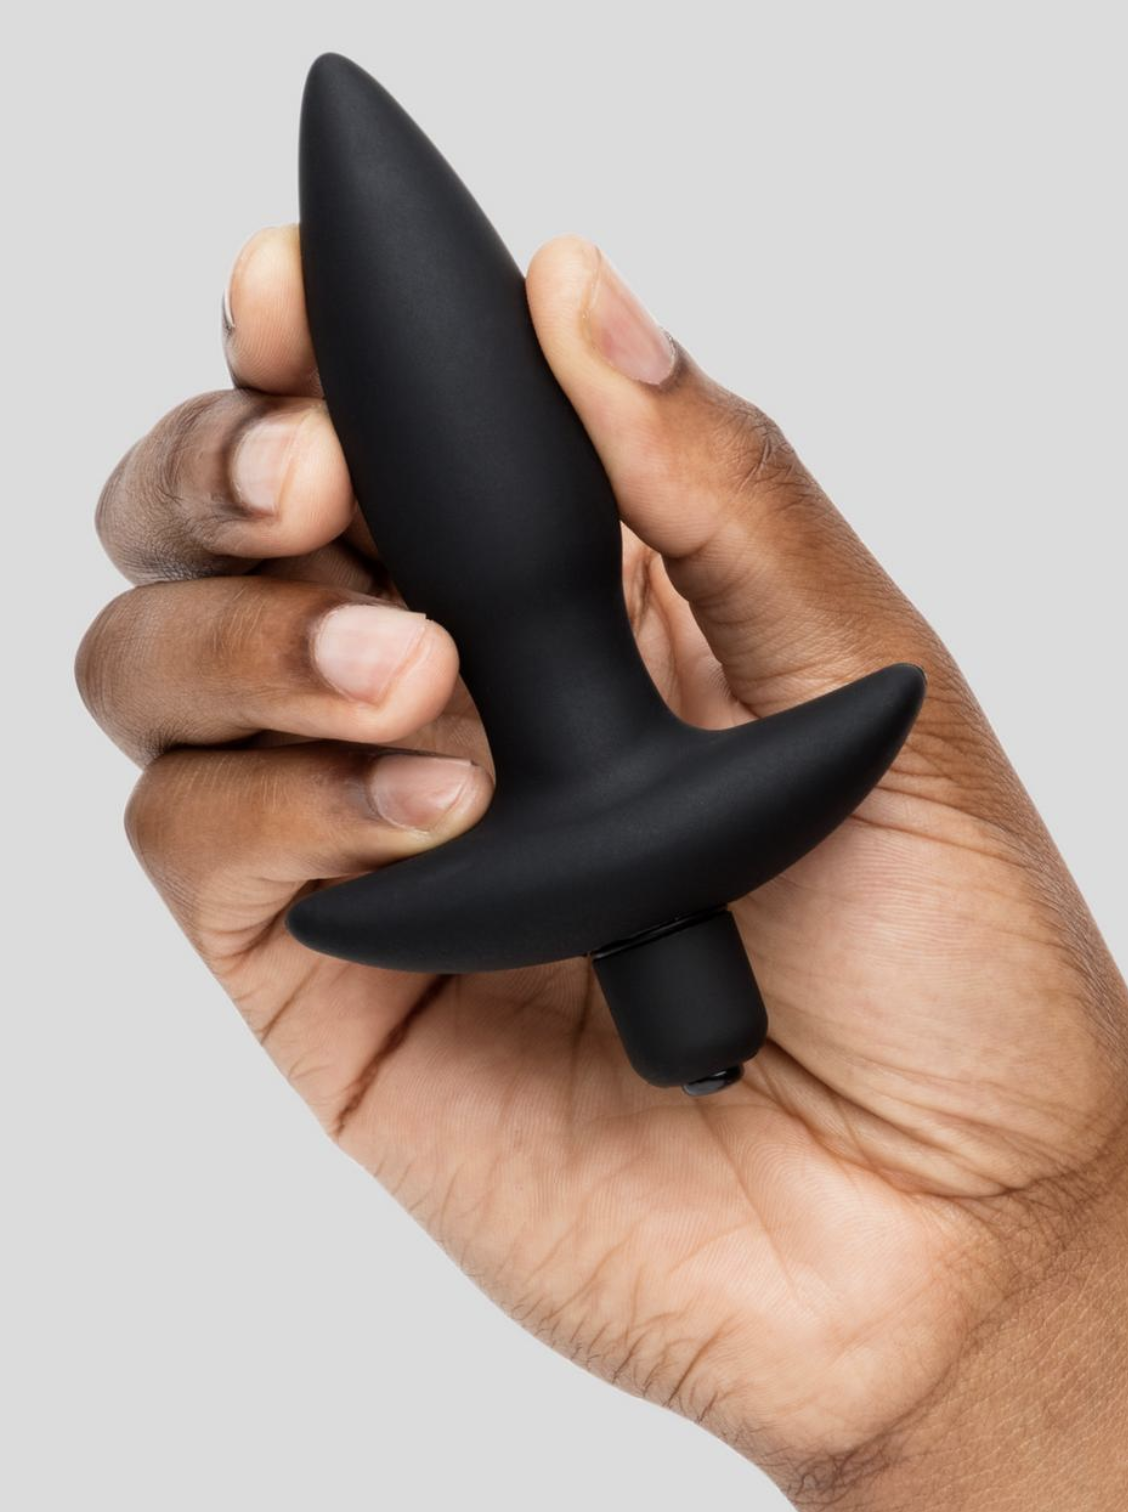 person holding the butt plug